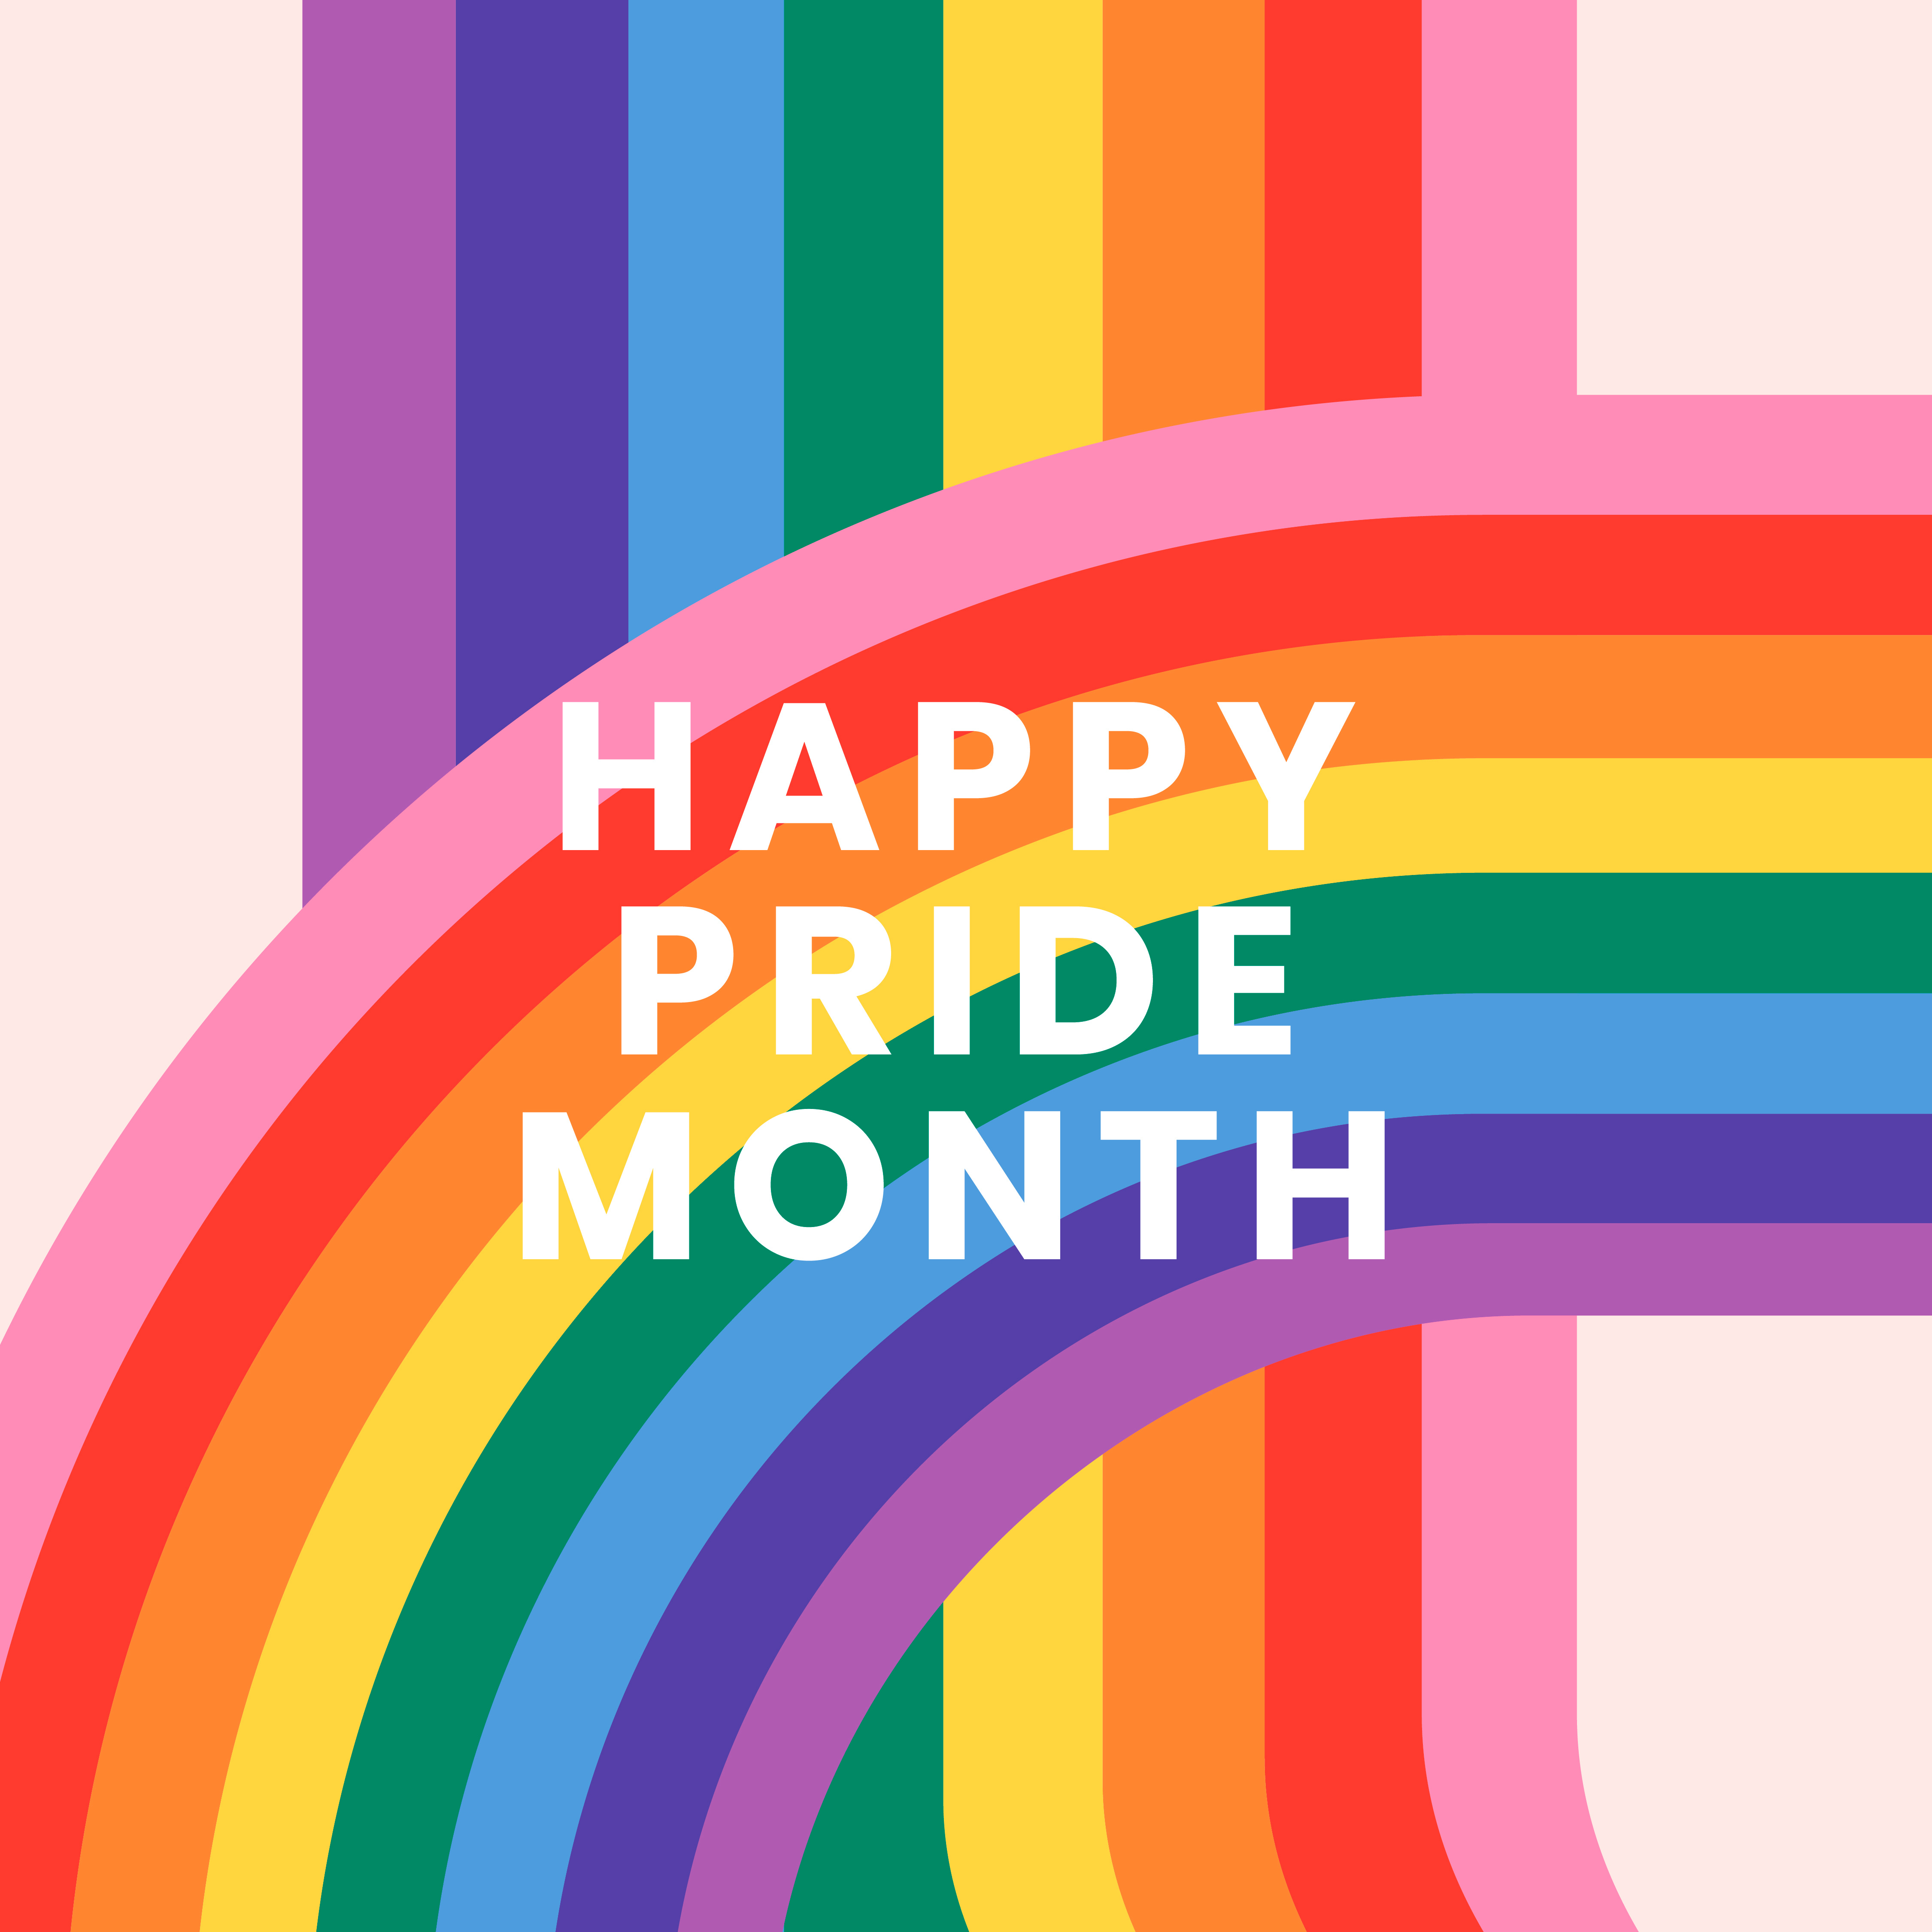 A decorative image saying "Happy Pride Month."